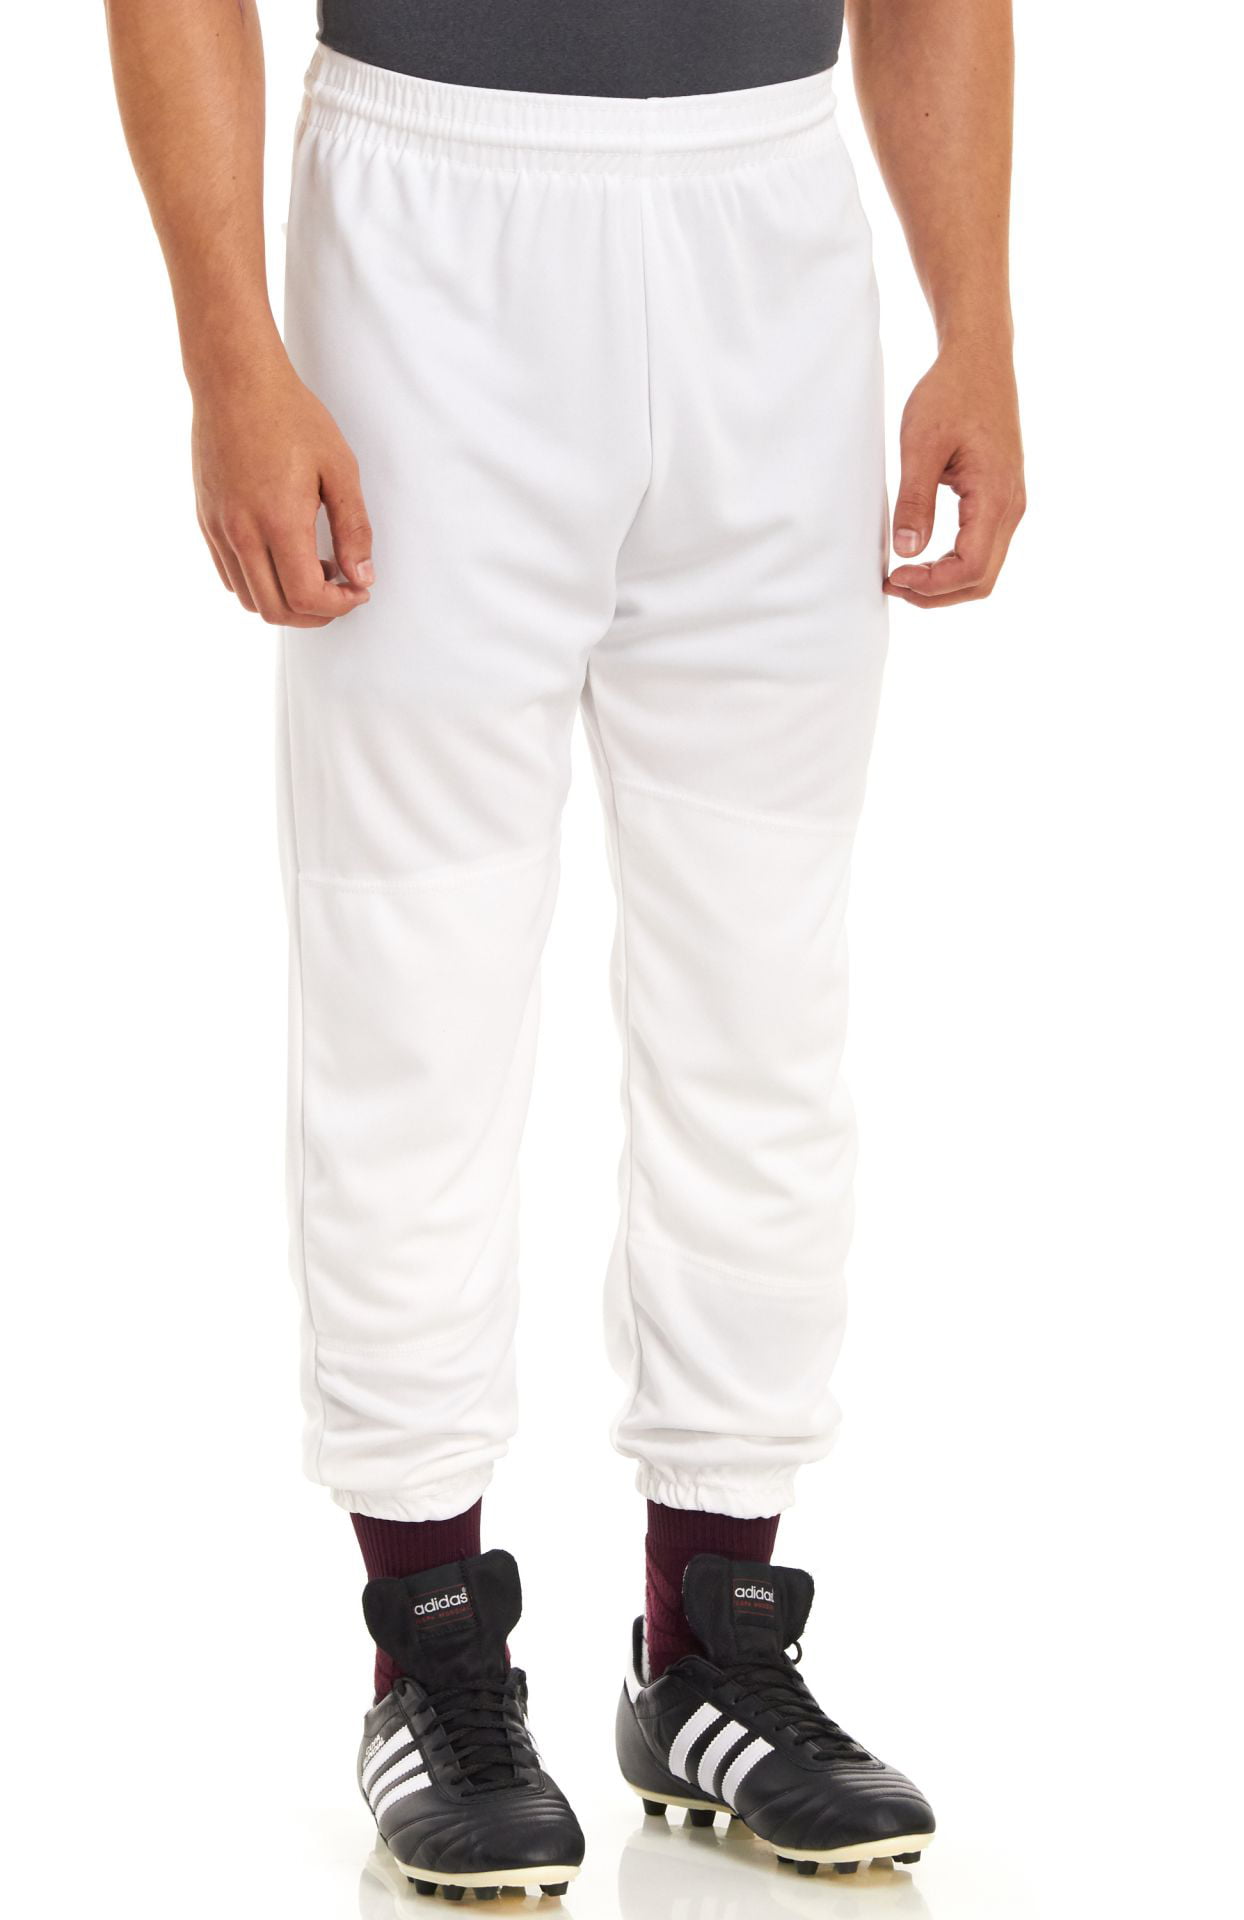 Details about   Martin Adult M Baseball Pull up Pant 1 pair white athletic sports NOS 